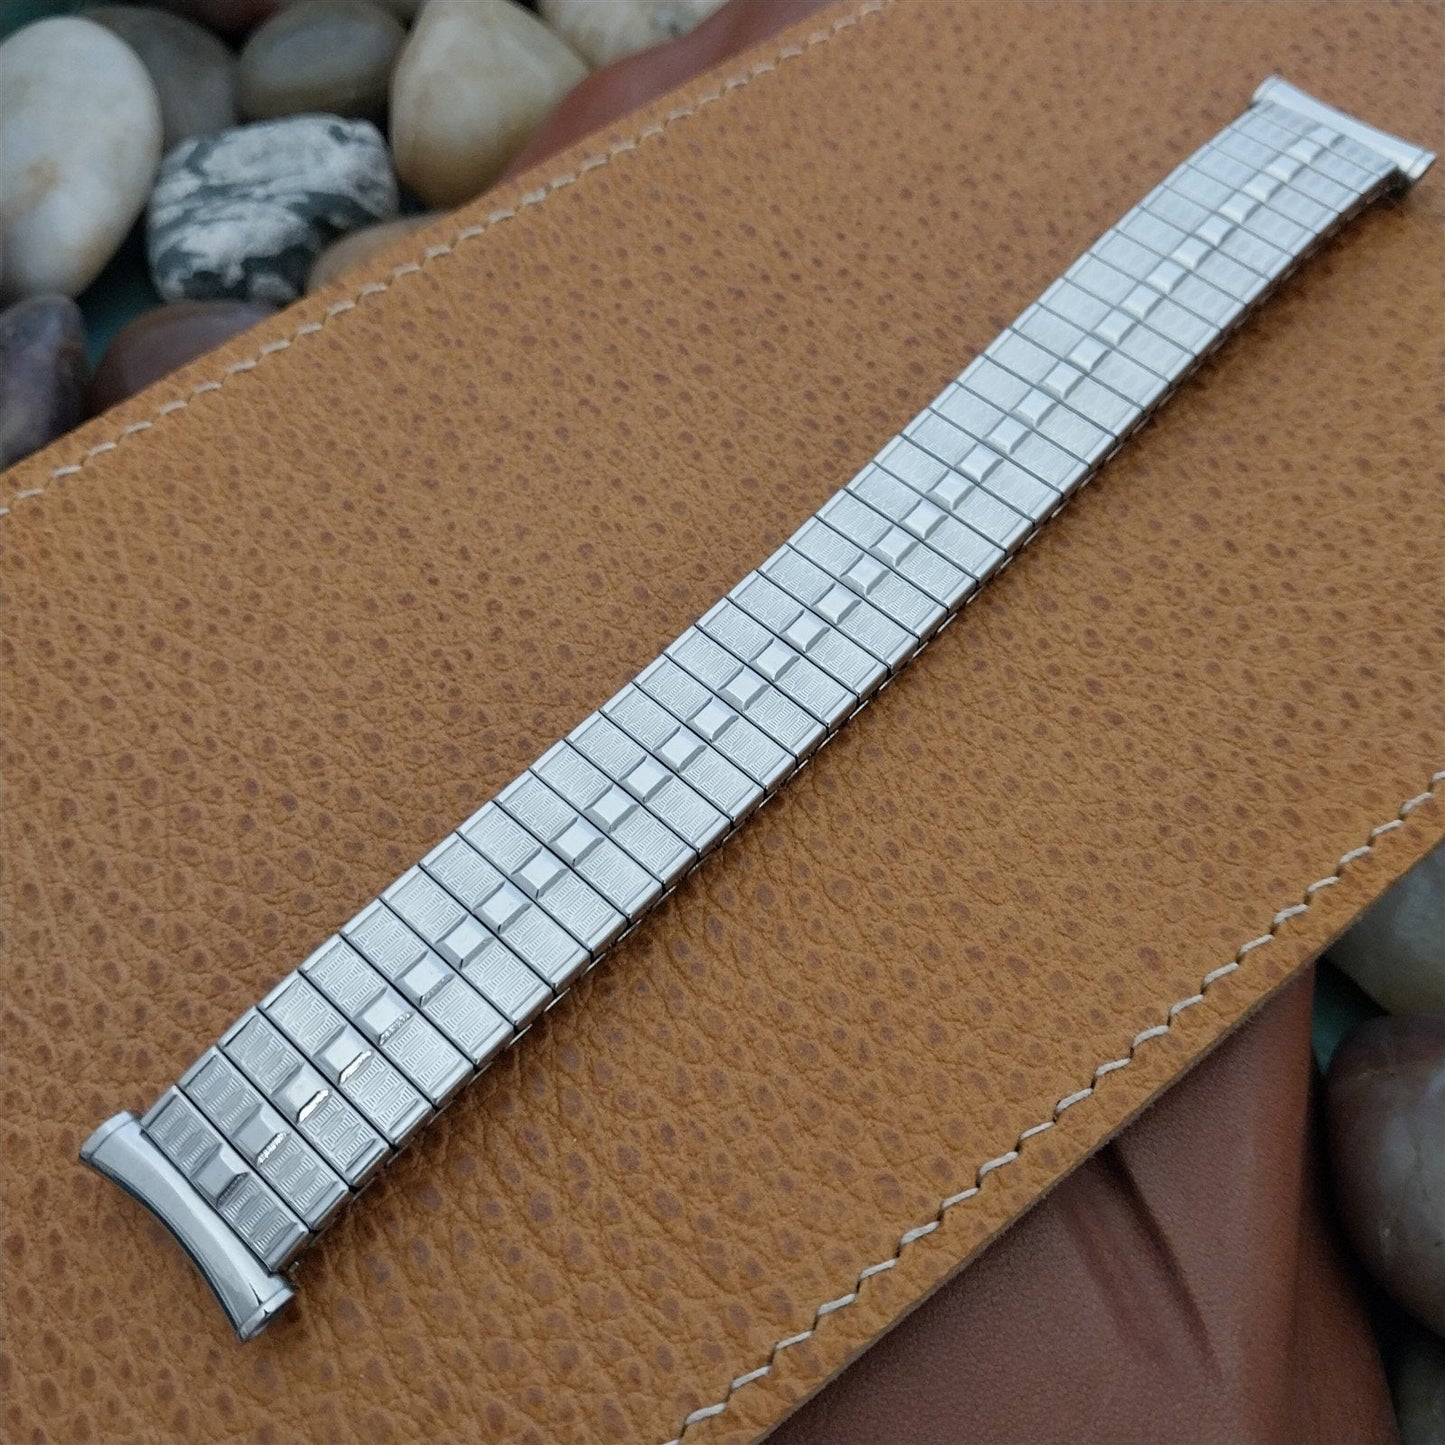 NOS Stainless Steel Expansion 16mm-20mm BearFlex Japan 1970s Vintage Watch Band